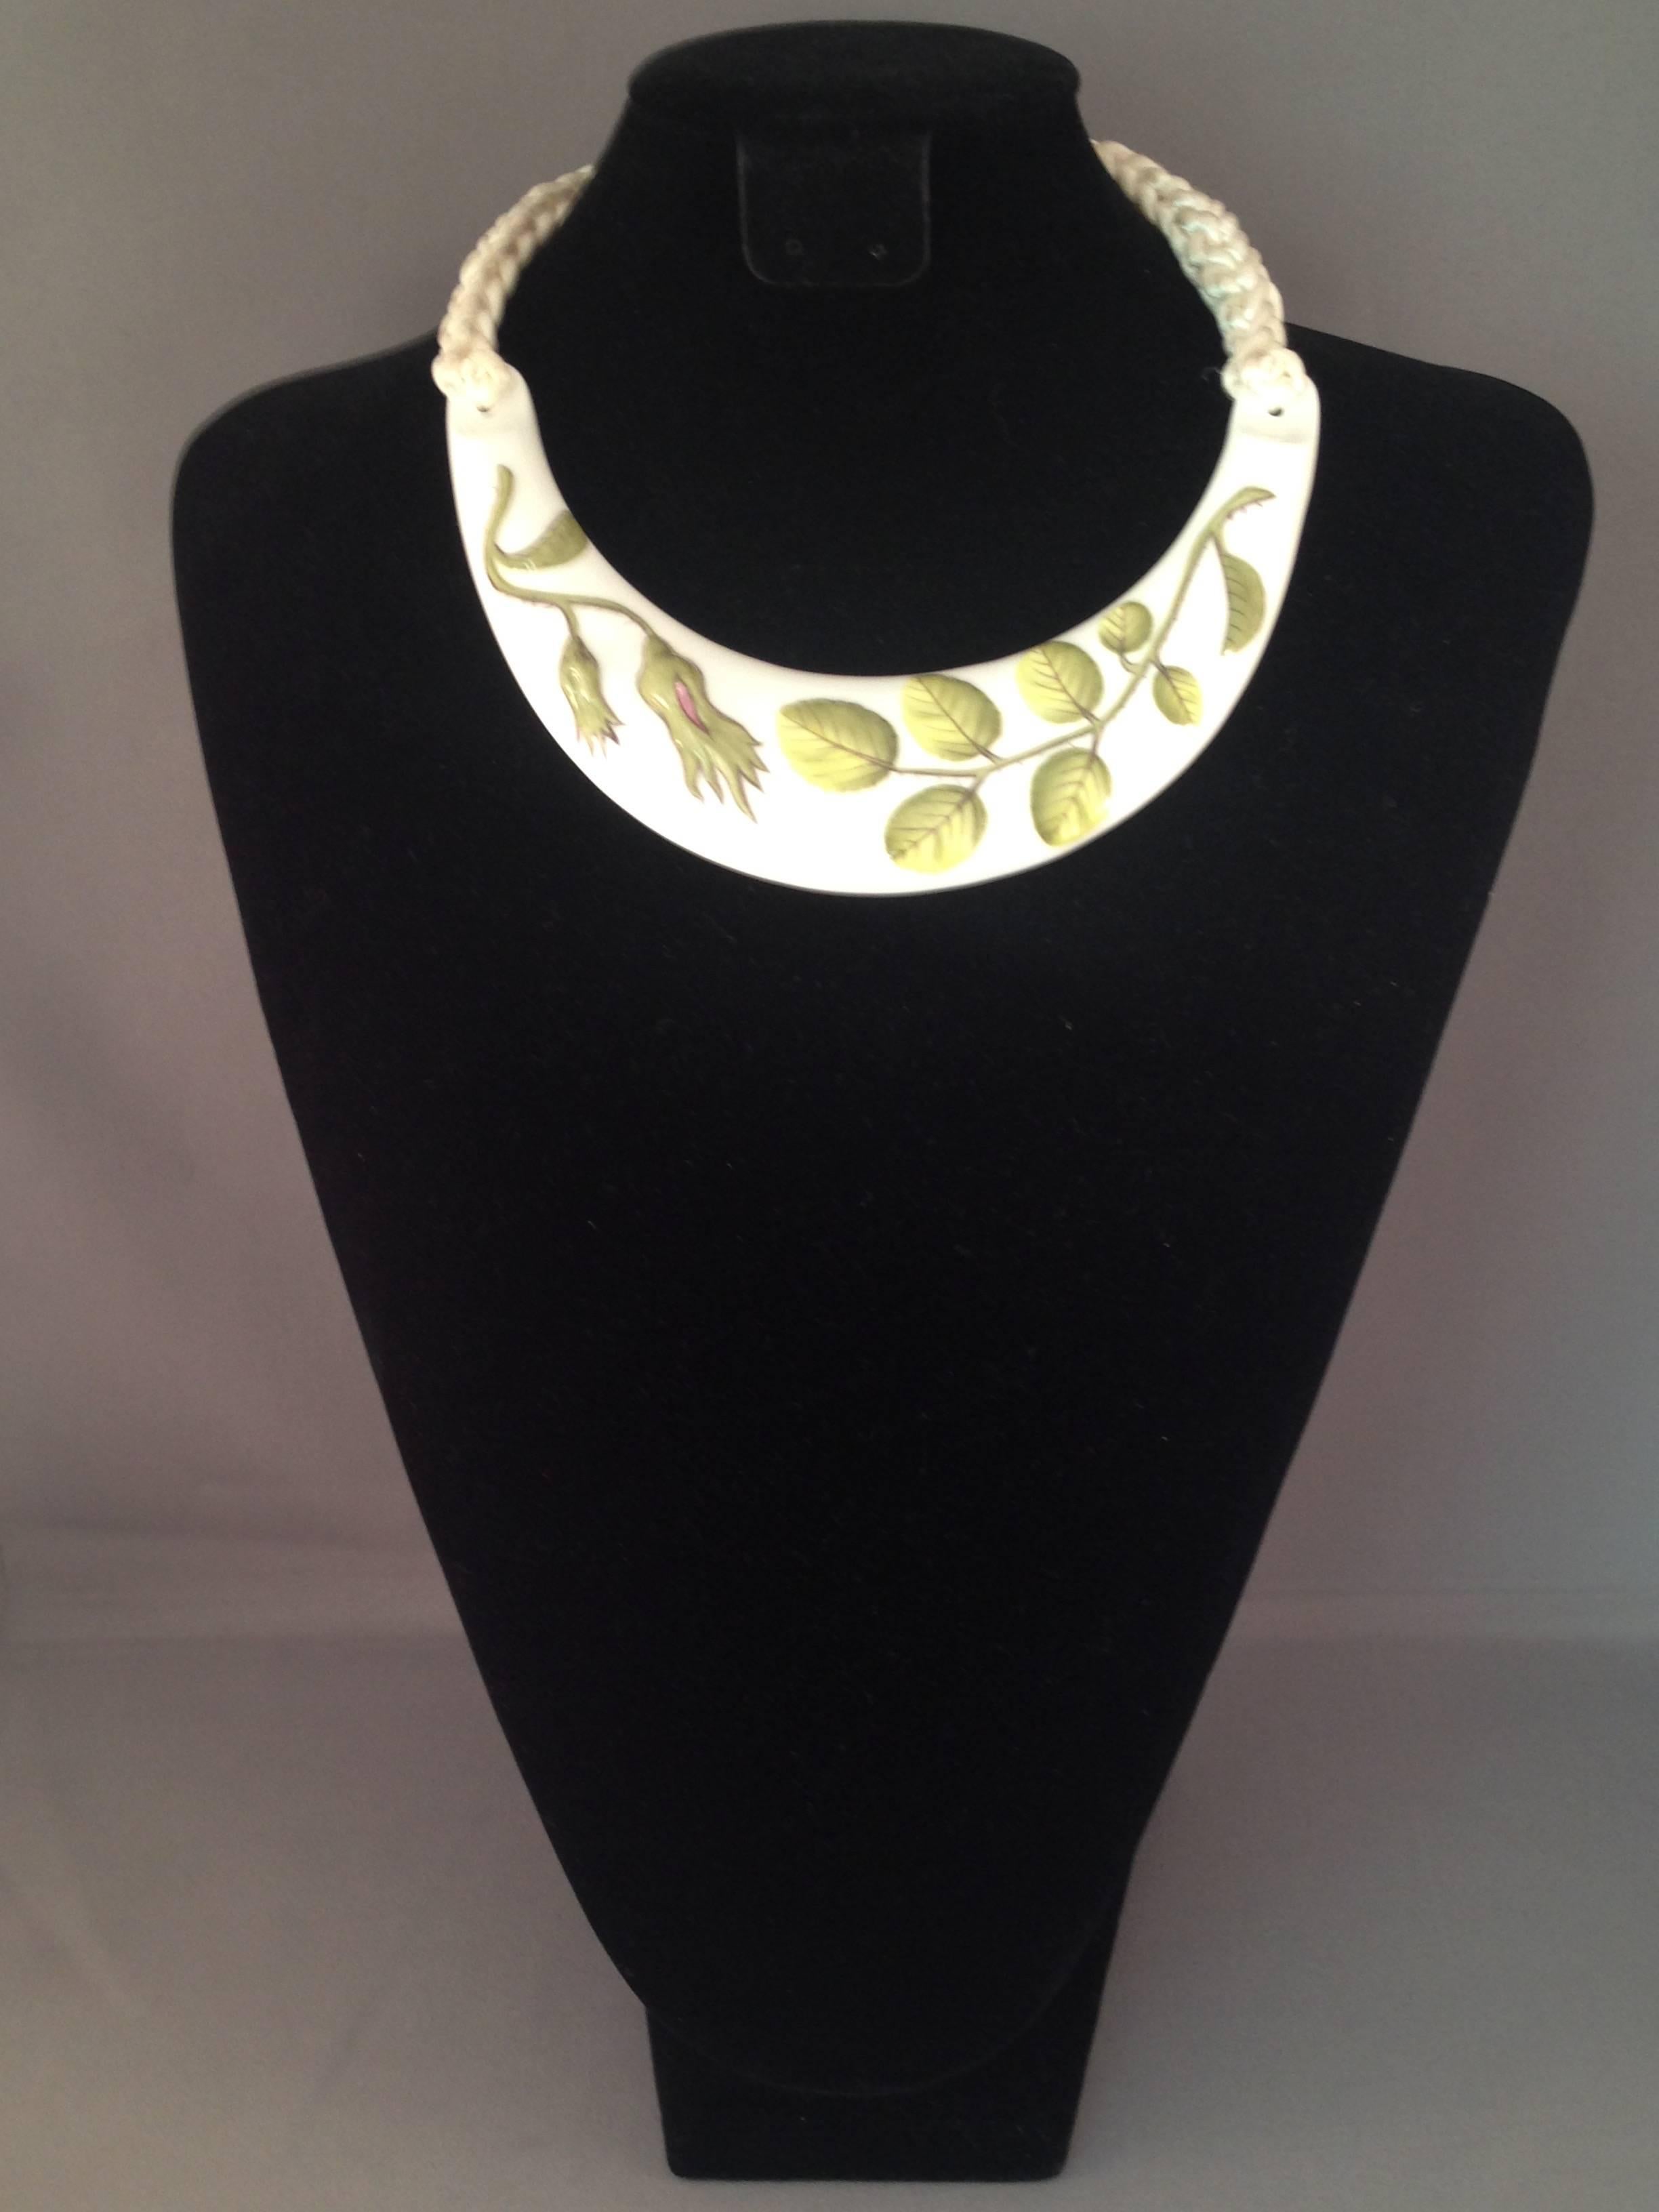 Rare 1976 Kenneth Jay Lane Royal Worchester Blind Earl Necklace In Excellent Condition For Sale In Chicago, IL